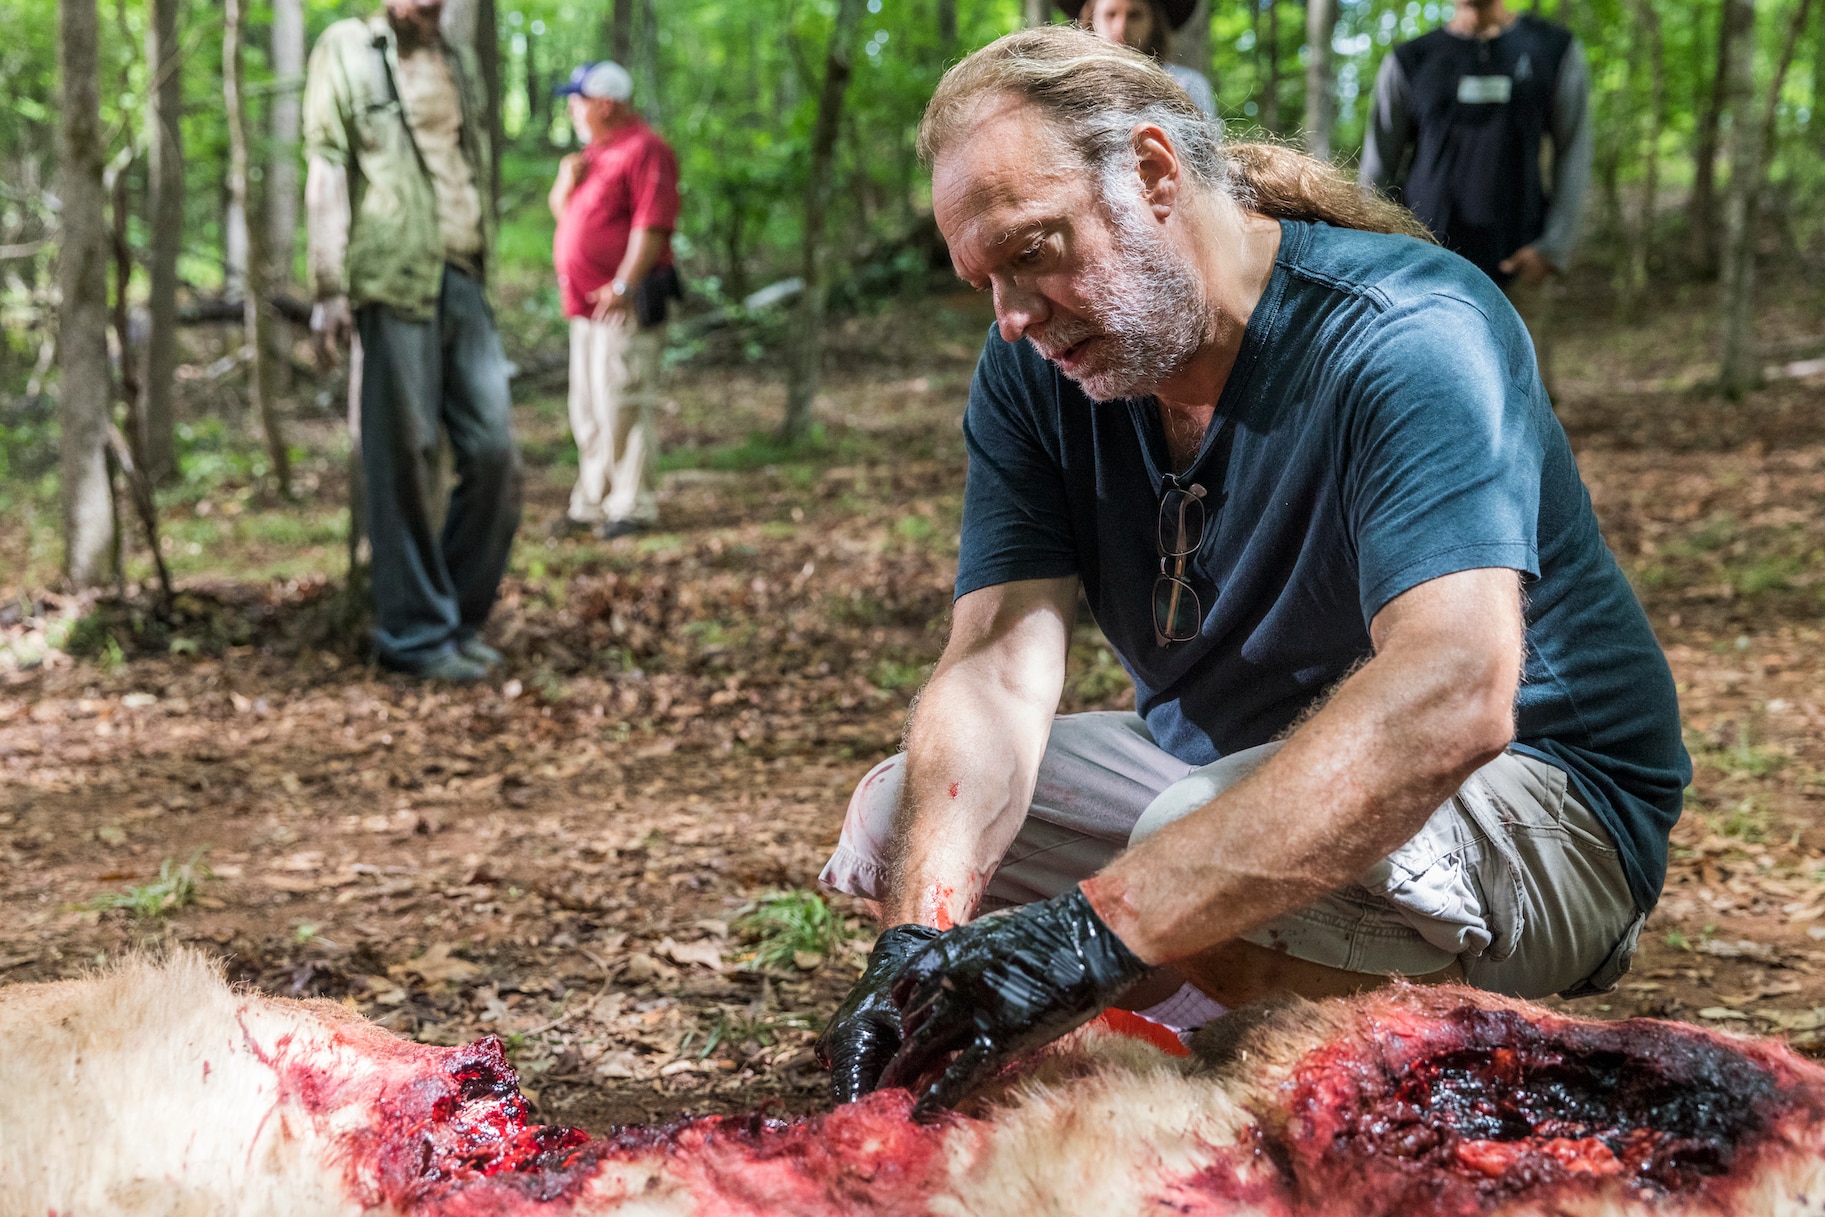 Greg Nicotero says after ‘The Walking Dead’ finale he could direct anything – even ‘Star Wars’